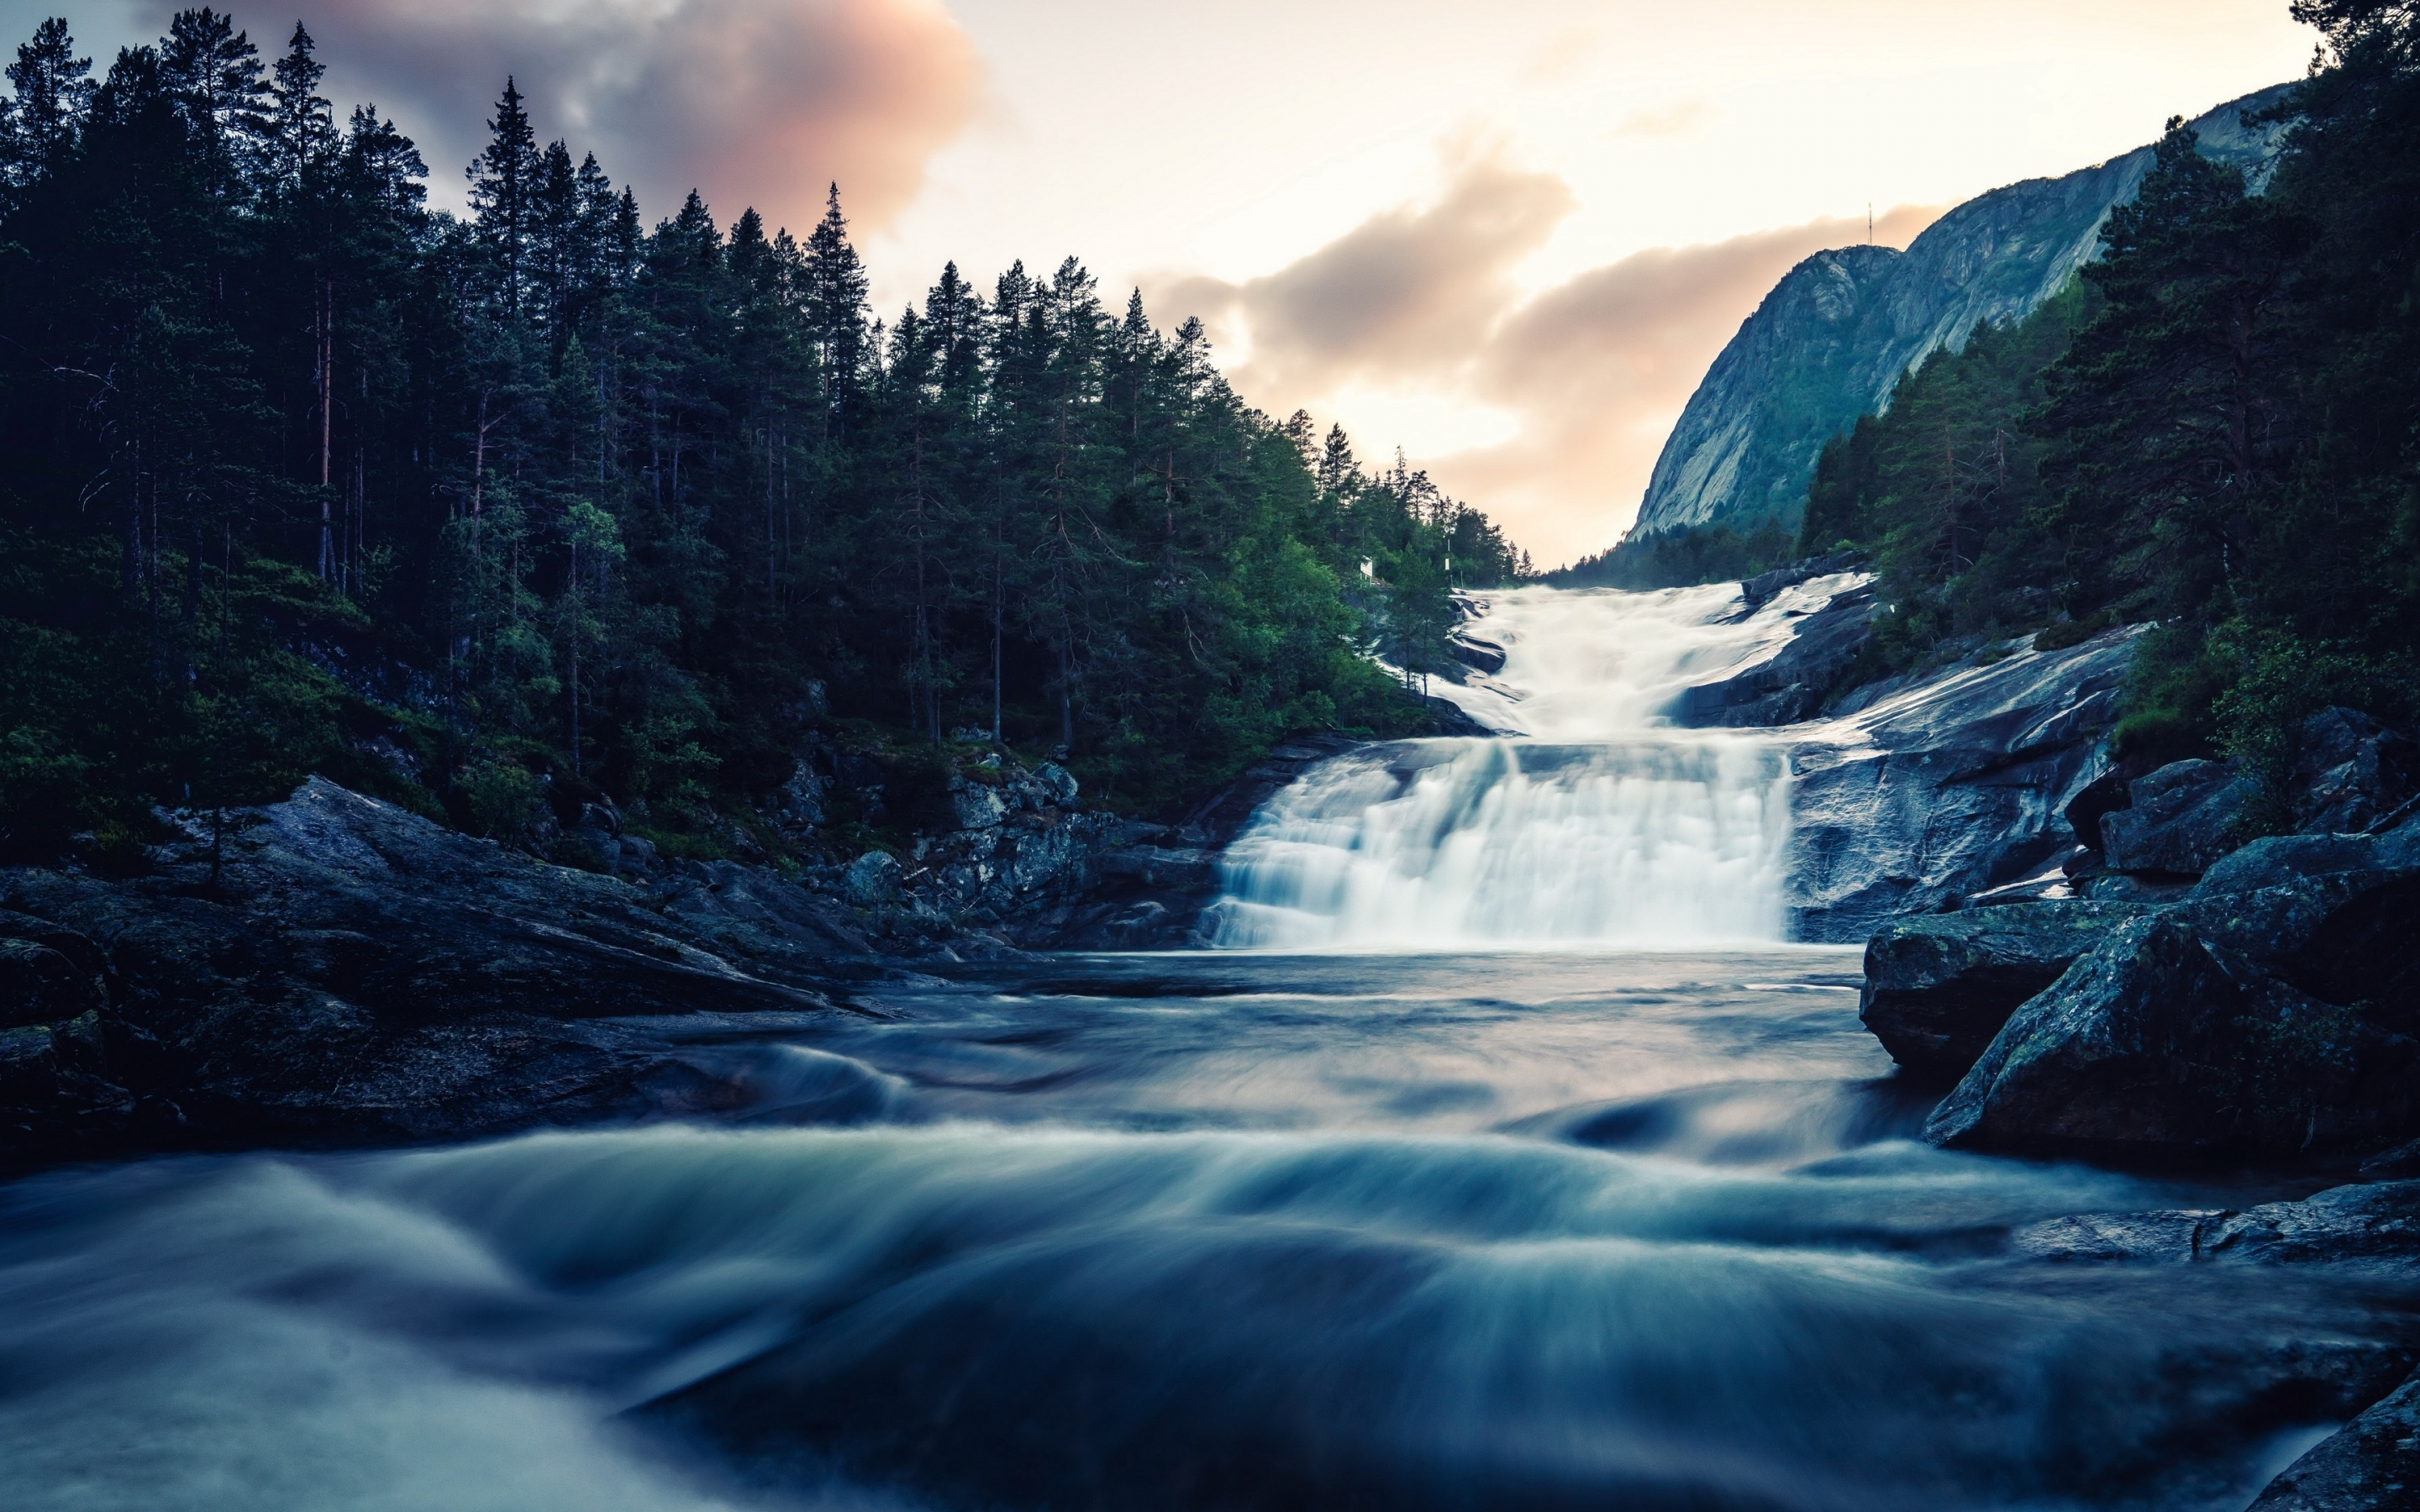 Stream of river, water flow, forest, nature, 2880x1800 wallpaper